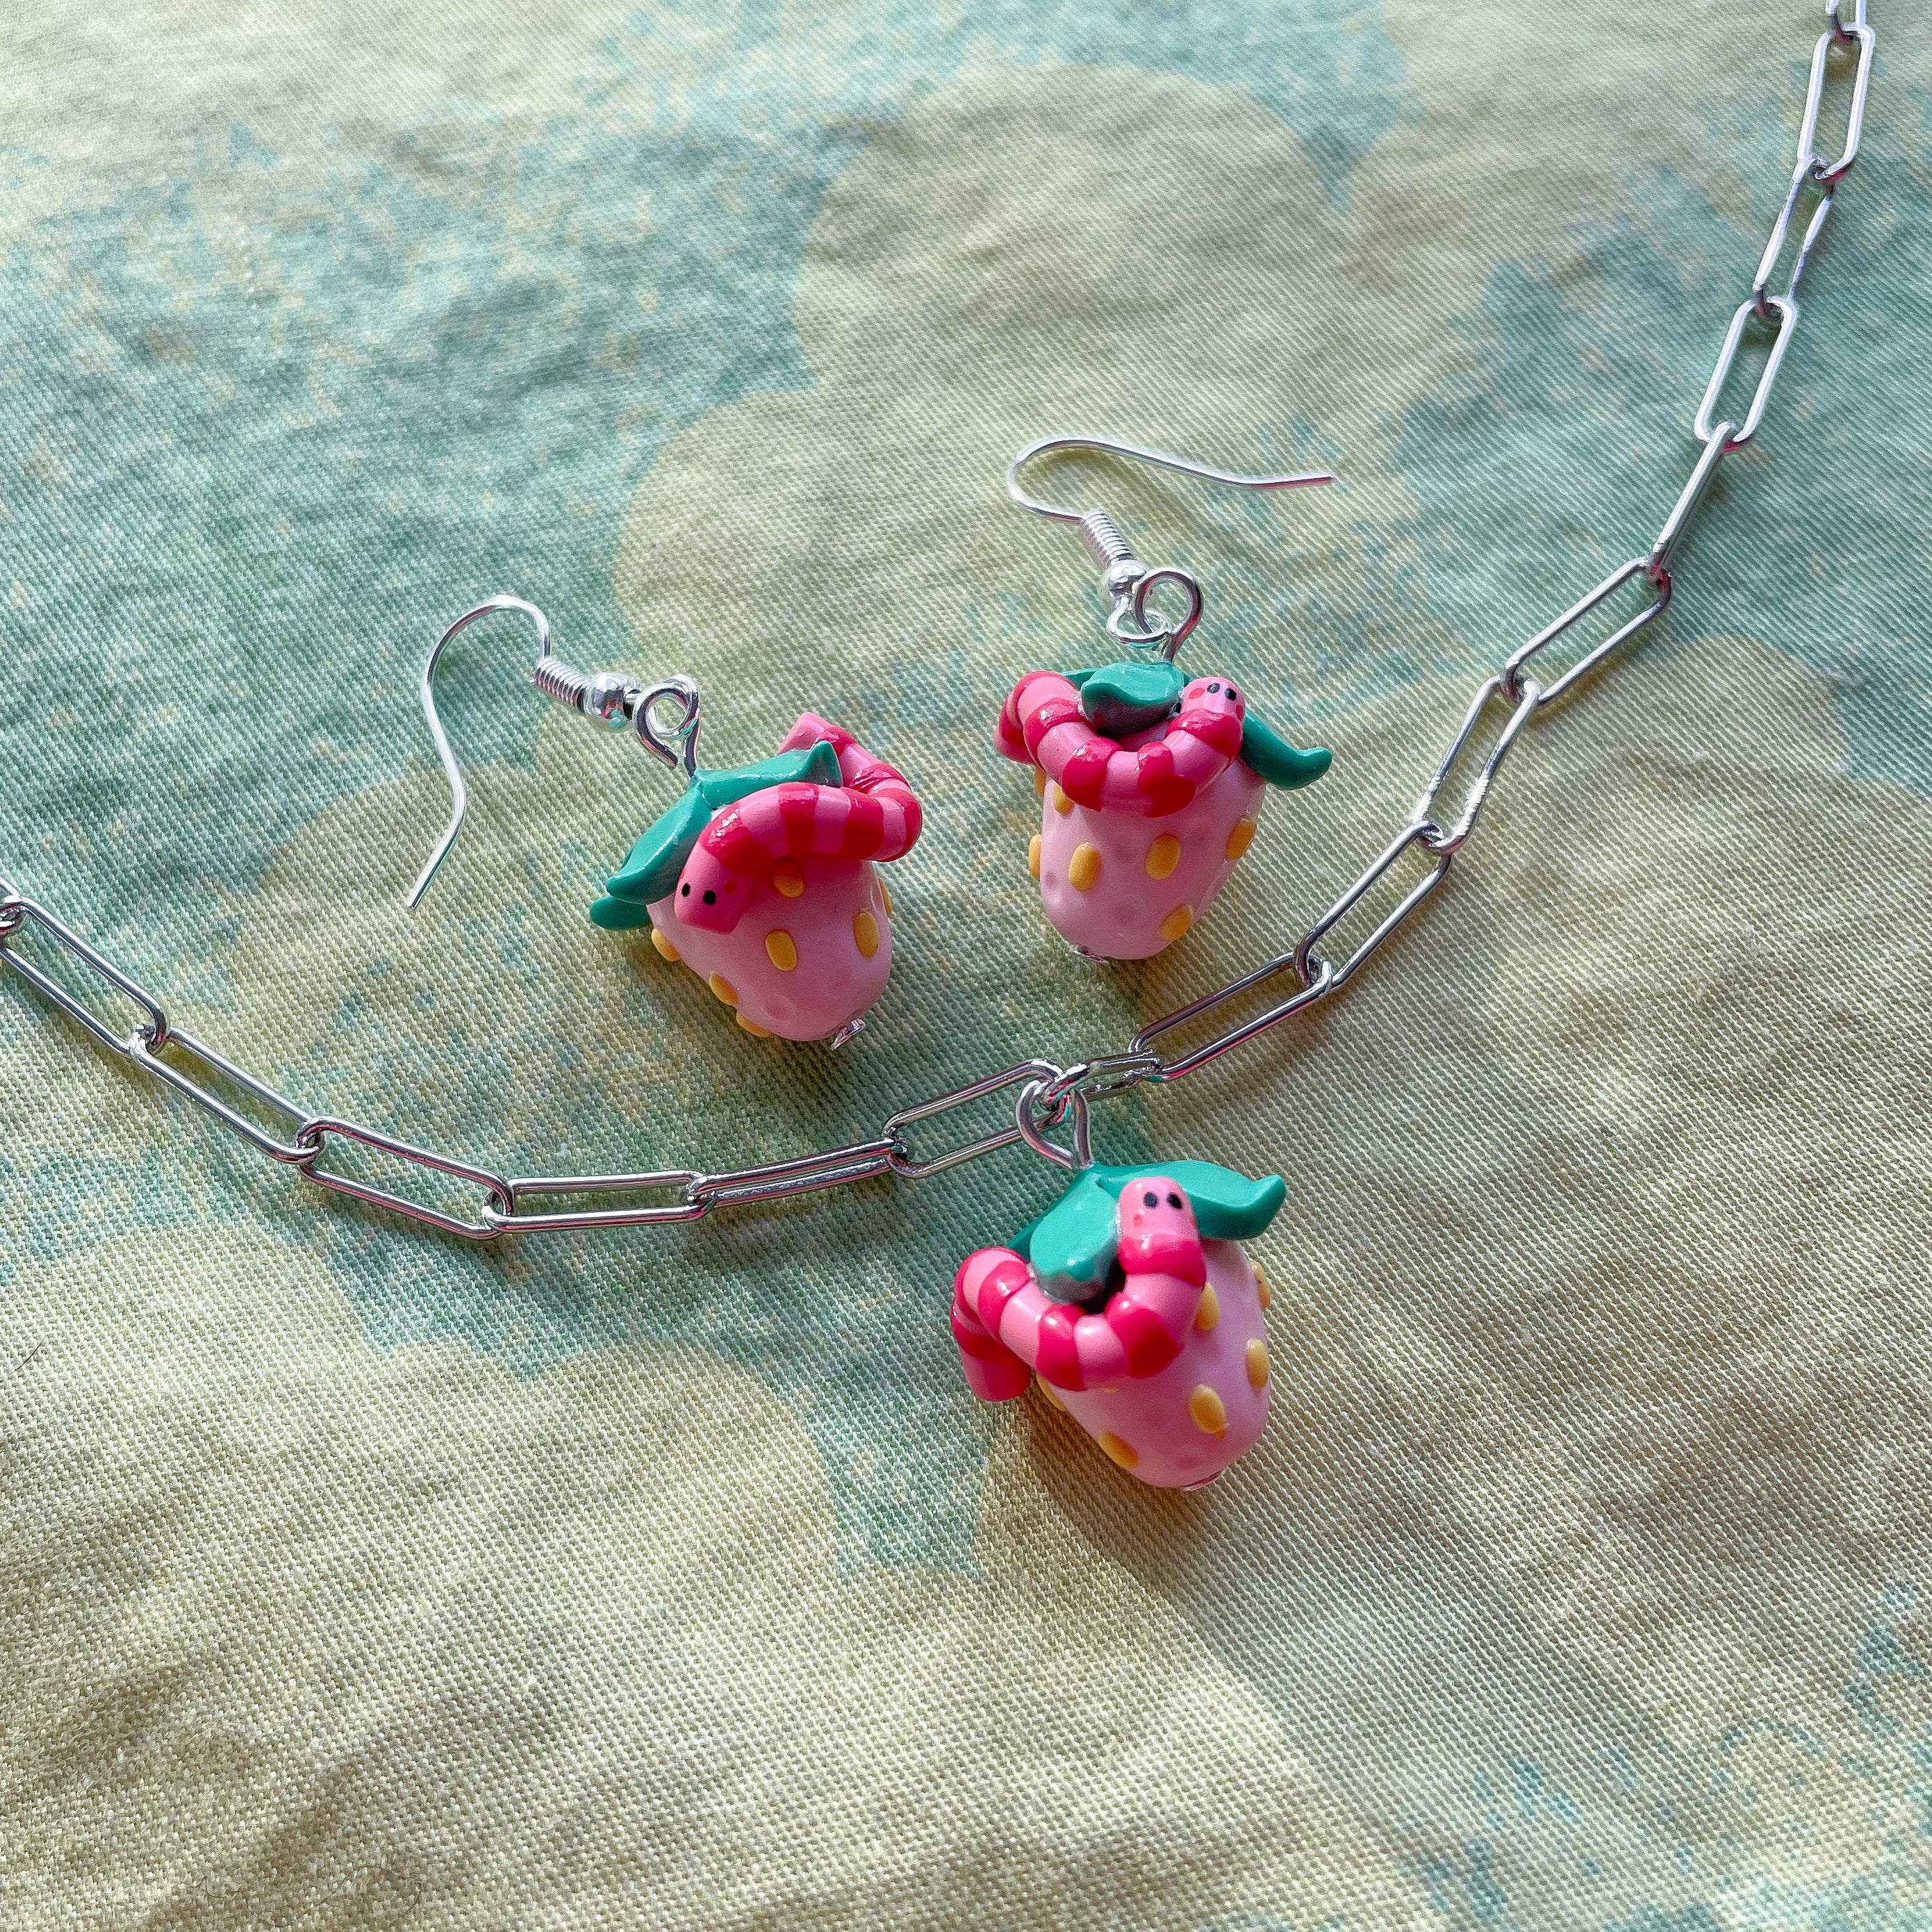 Strawberry Worms - Earrings and Necklace Combo